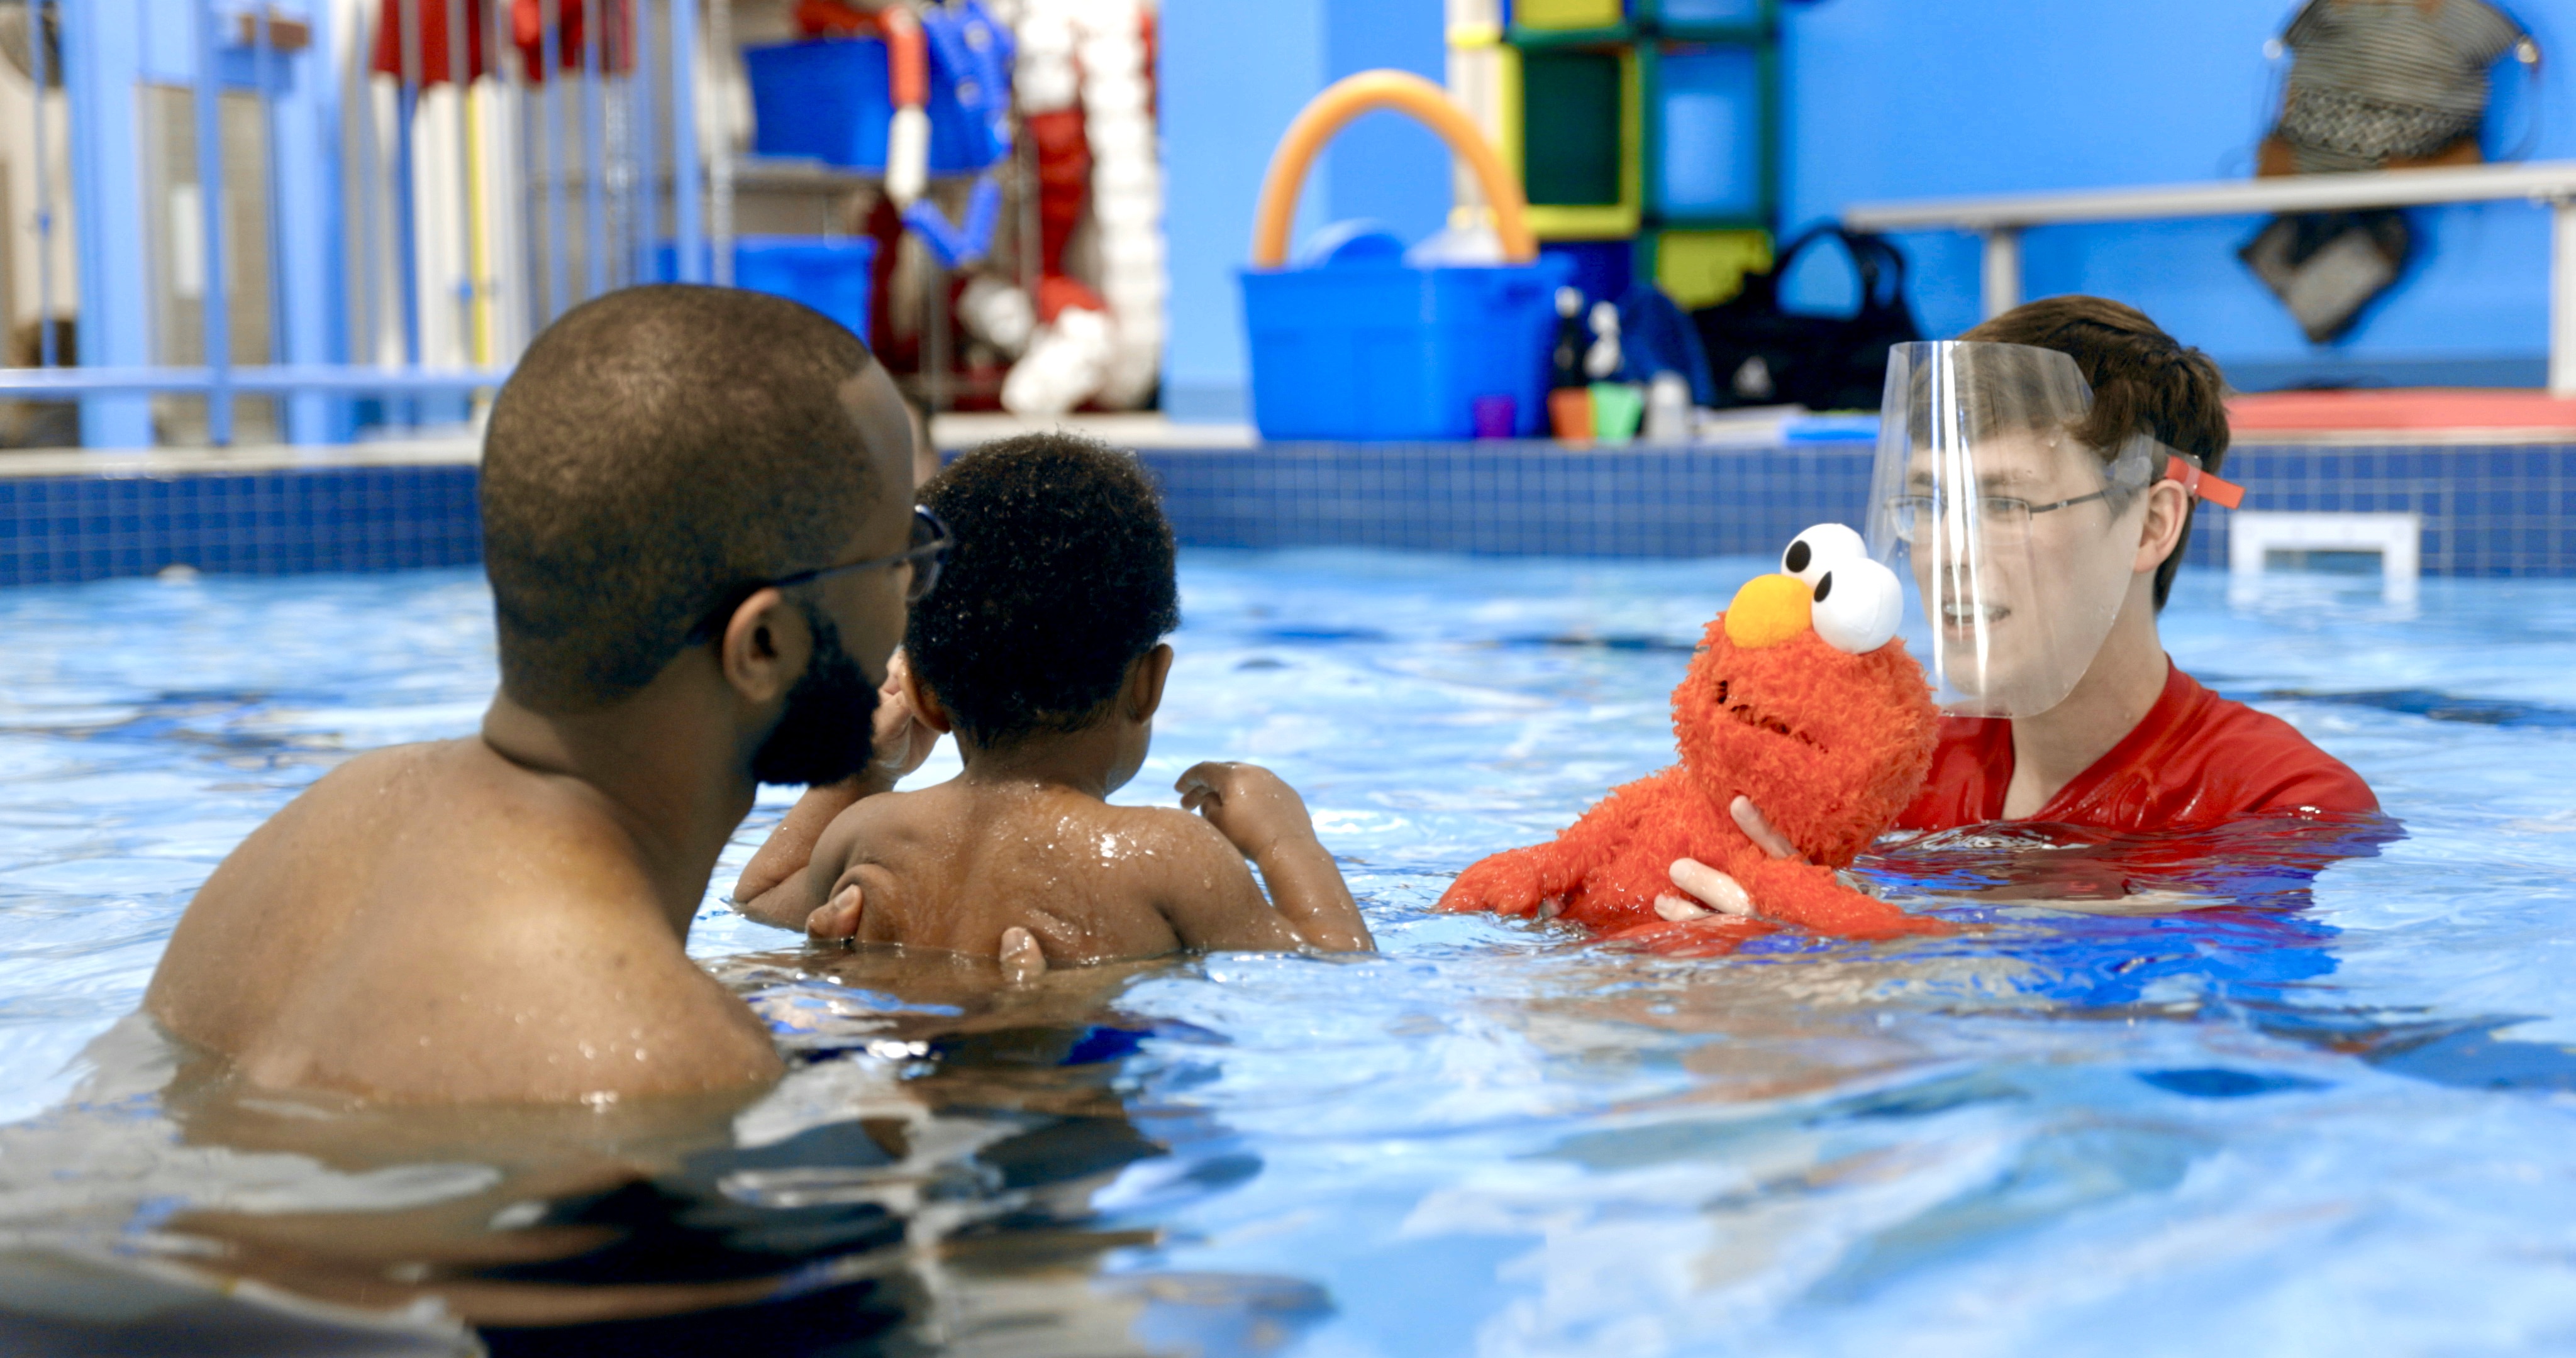 When Should Your Baby Start Swimming Lessons?